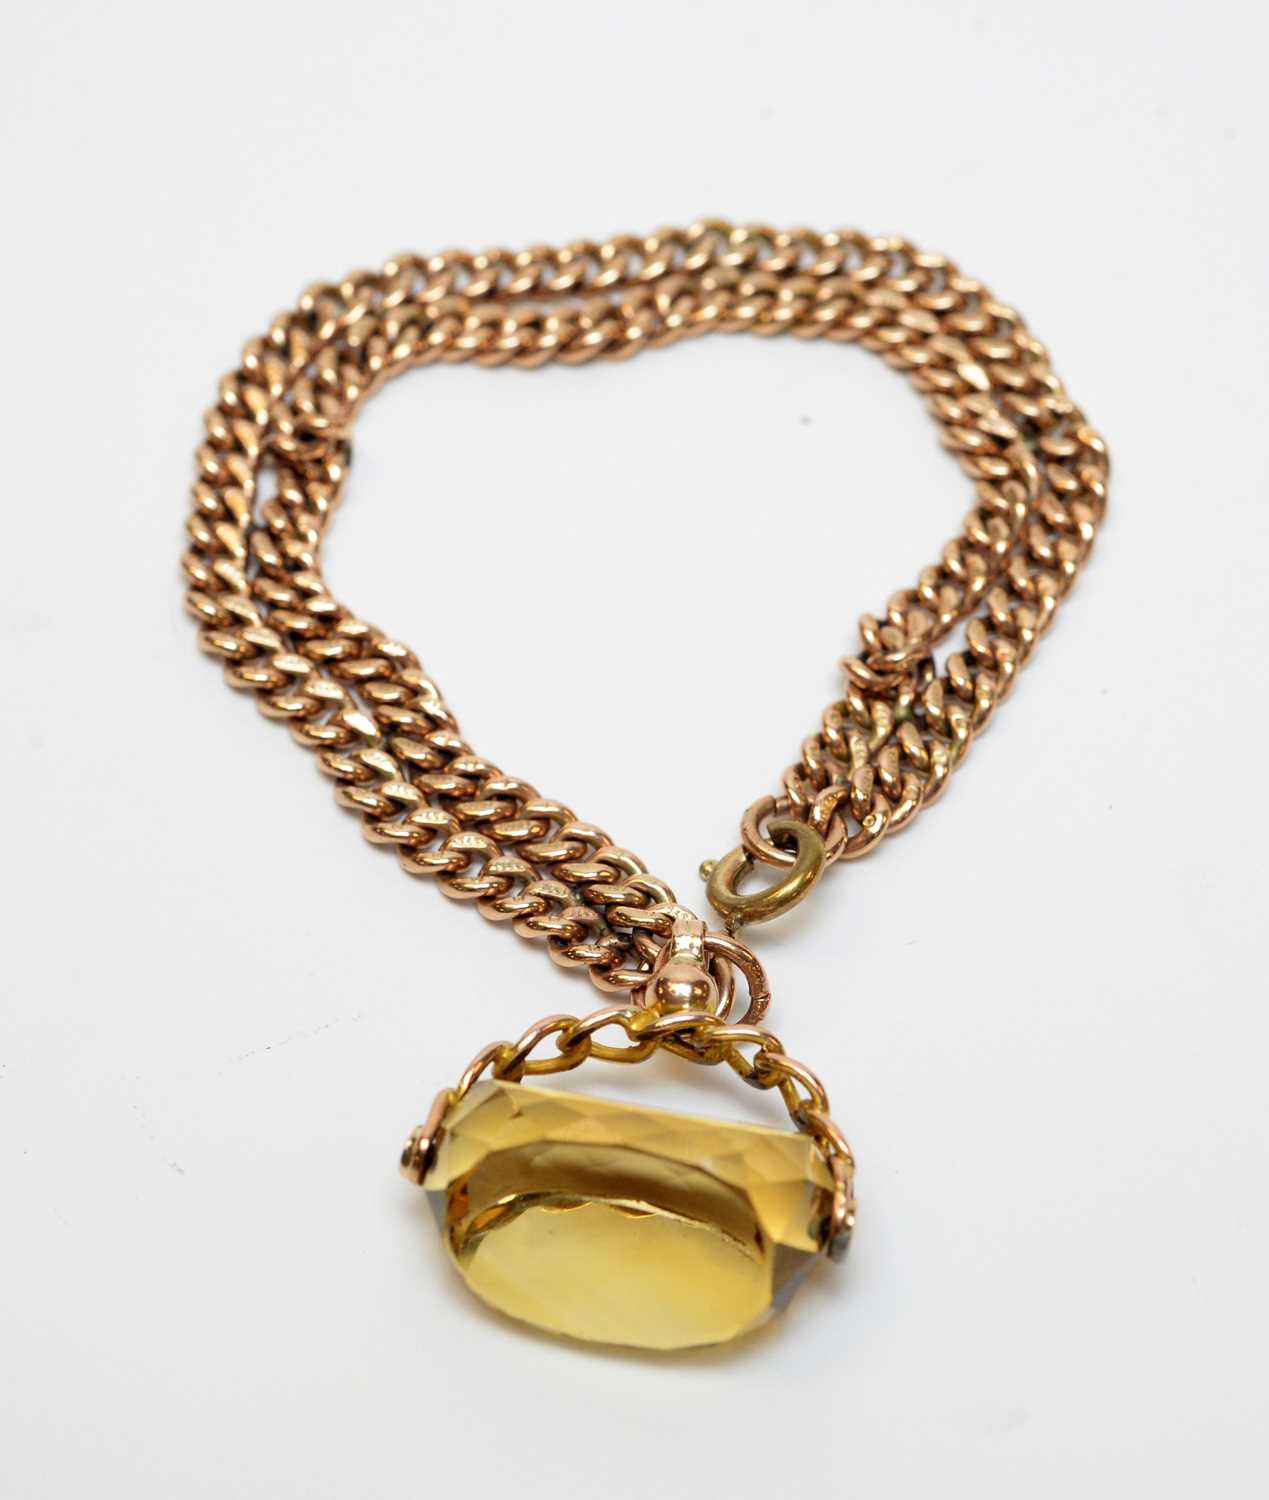 Lot 14 - An antique 9ct gold watch chain bracelet with citrine fob seal charm.